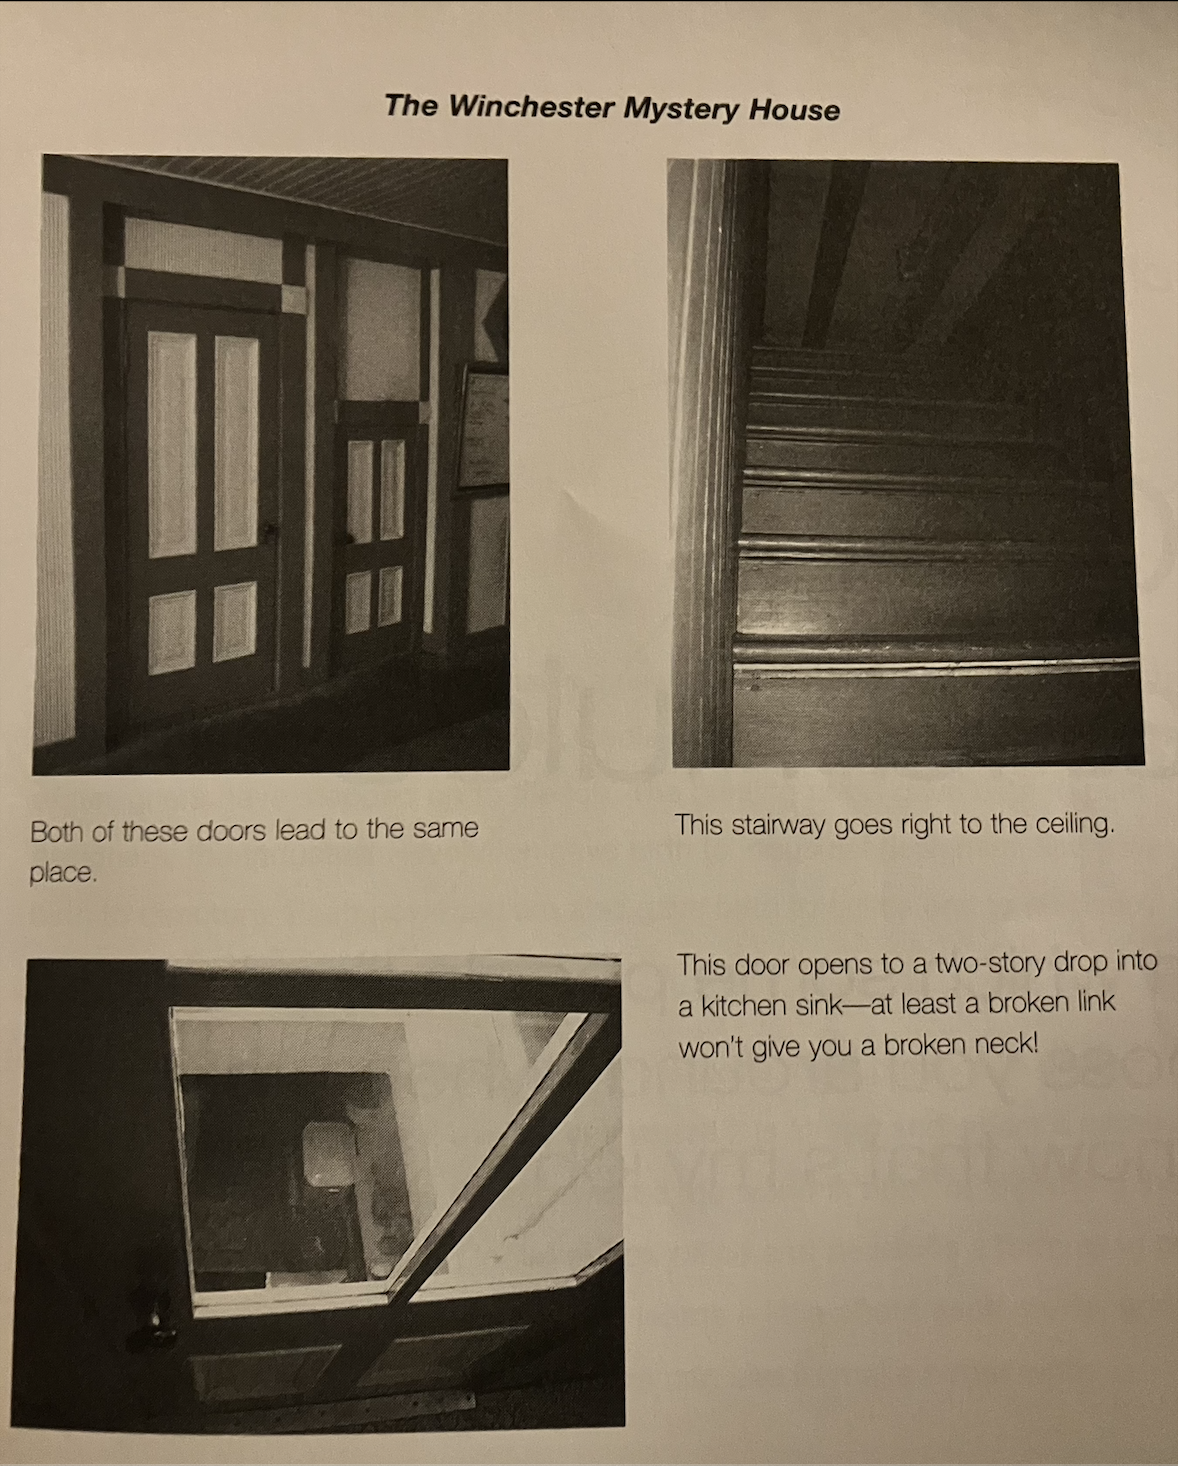 Pictures of wall with a large door and small door next to each other, with caption 'both of these doors lead to the same place'. Picture of stairwell and caption 'The stairway goes right to the ceiling' and image of door with window looking down to a sink The door opens to a two-story drop into a kitchen sink—at least a broken link won't give you a broken neck!'